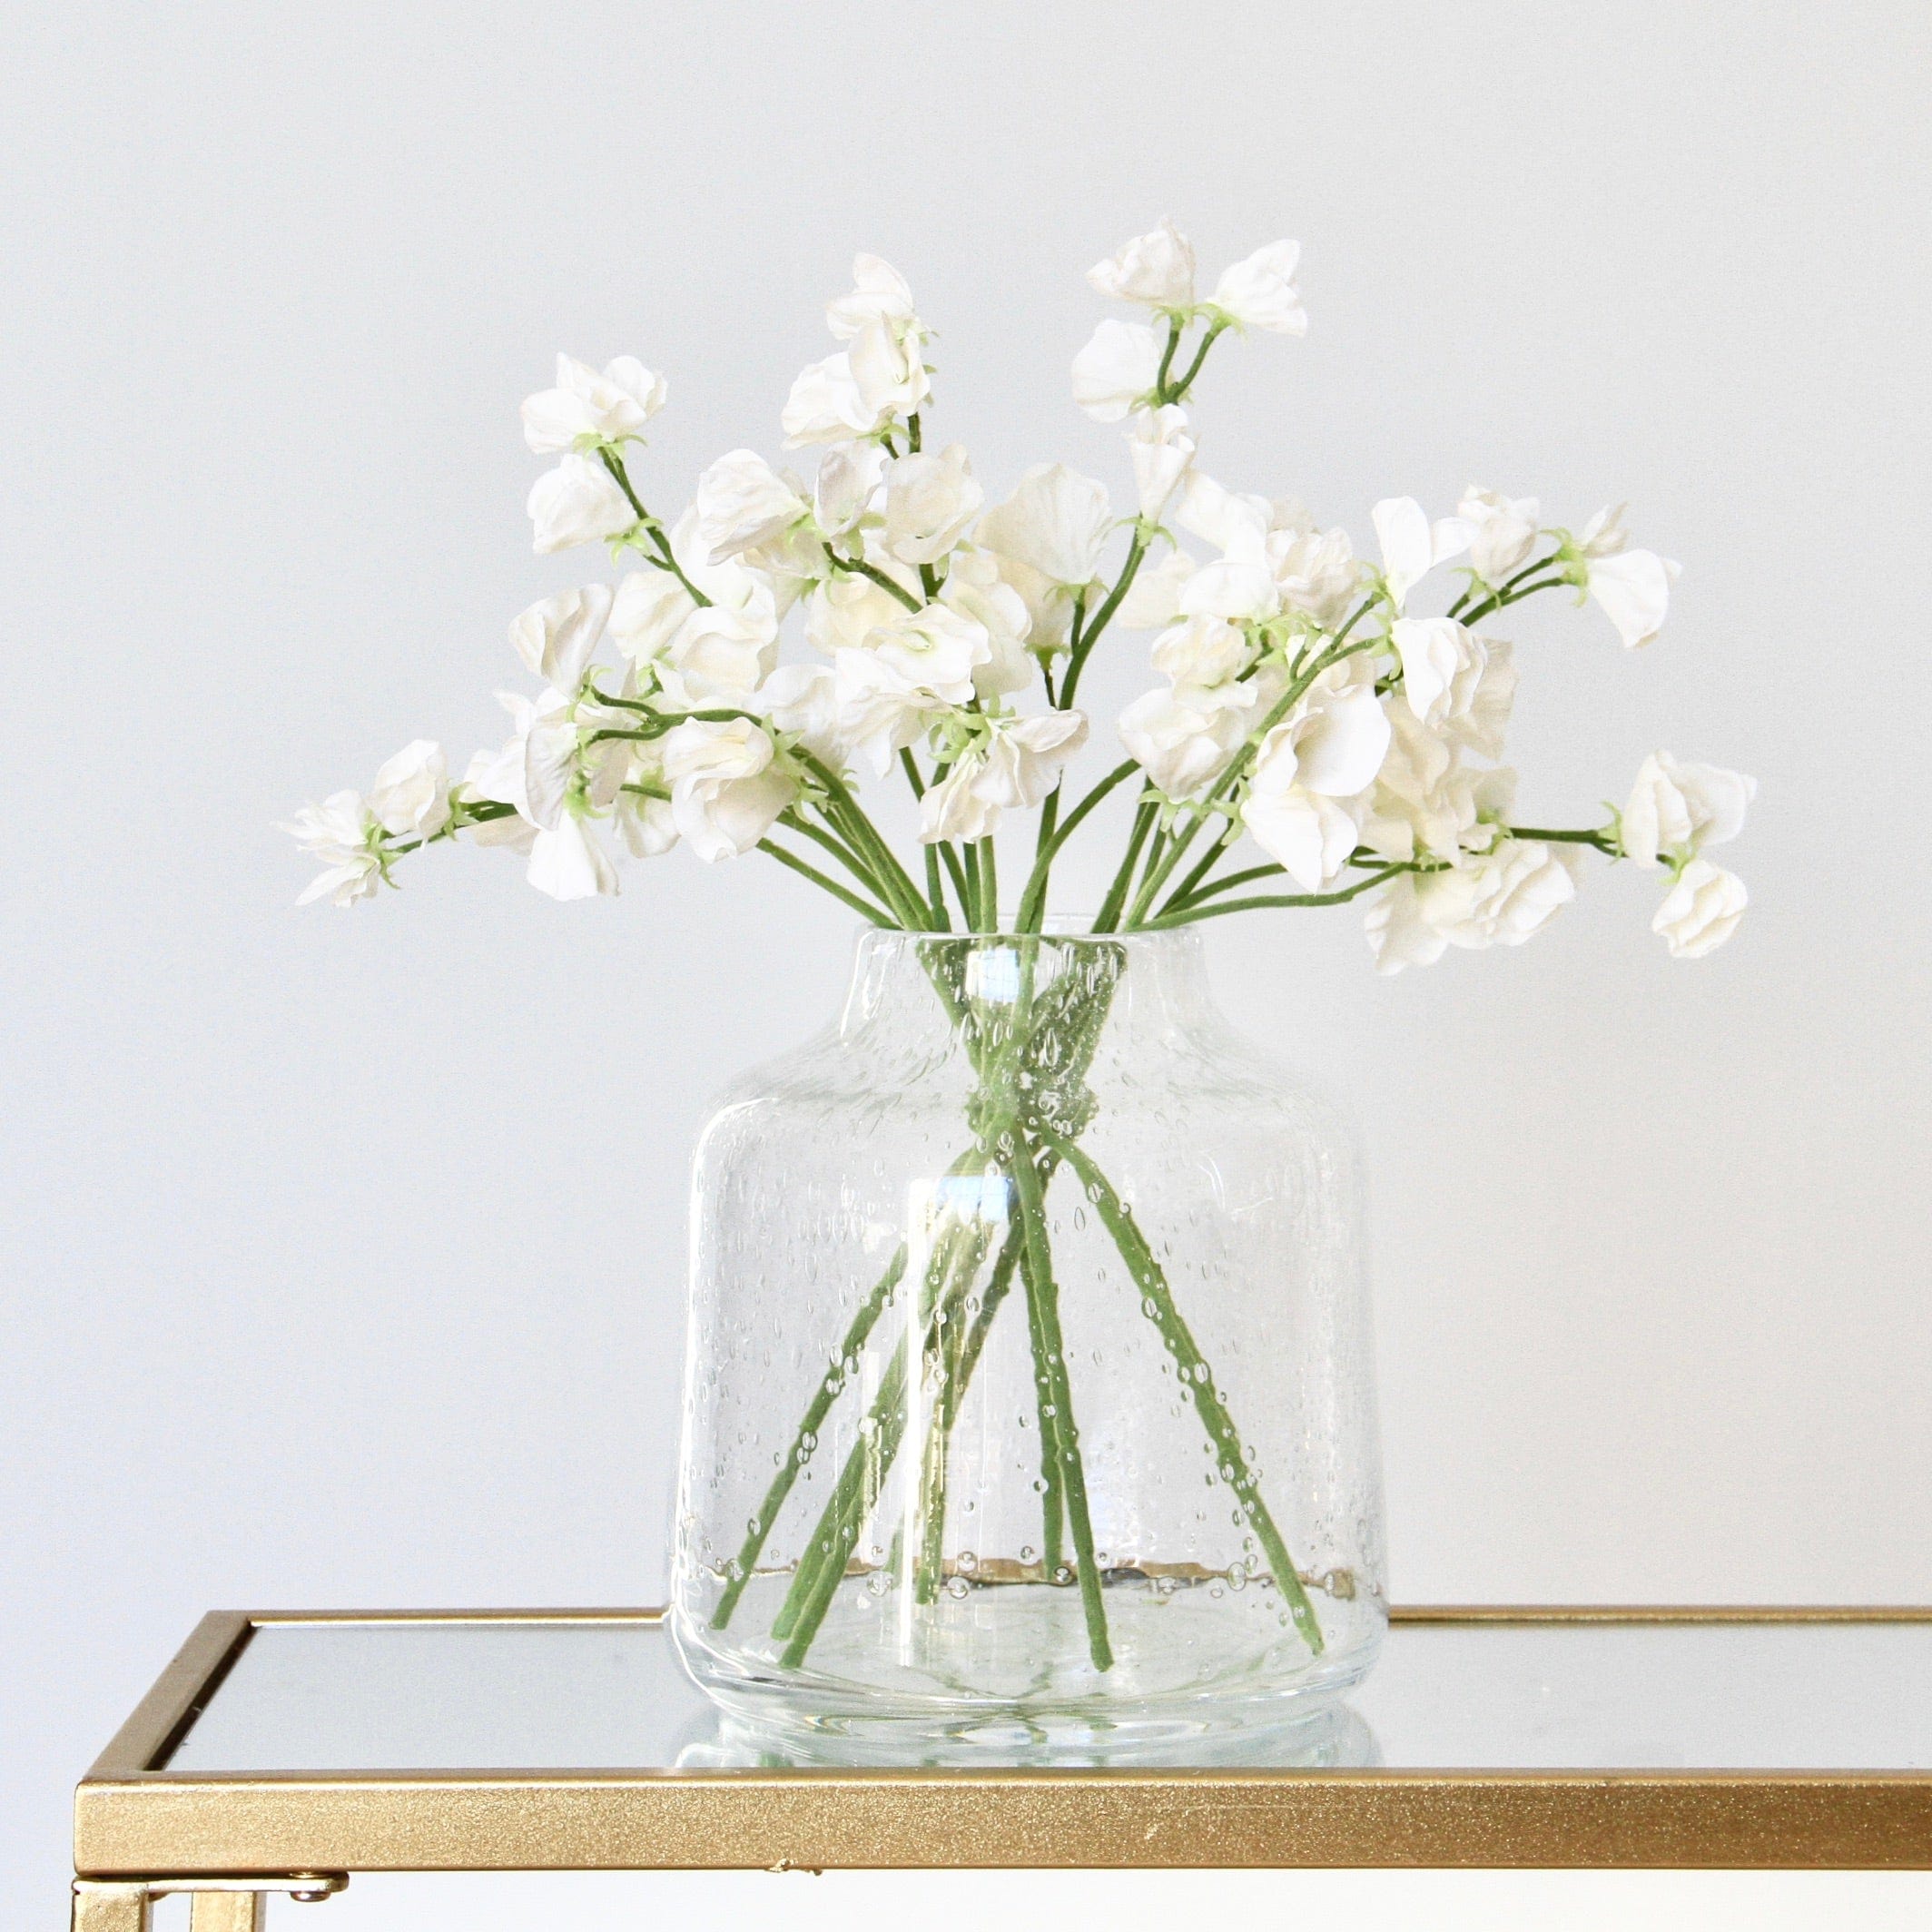 Artificial flowers in vase perfect for faux flowers in vase or artificial flower arrangements in vase, a luxury Flower Vase Large Clear Perfect Vase With Bubbles from Amaranthine Blooms UK